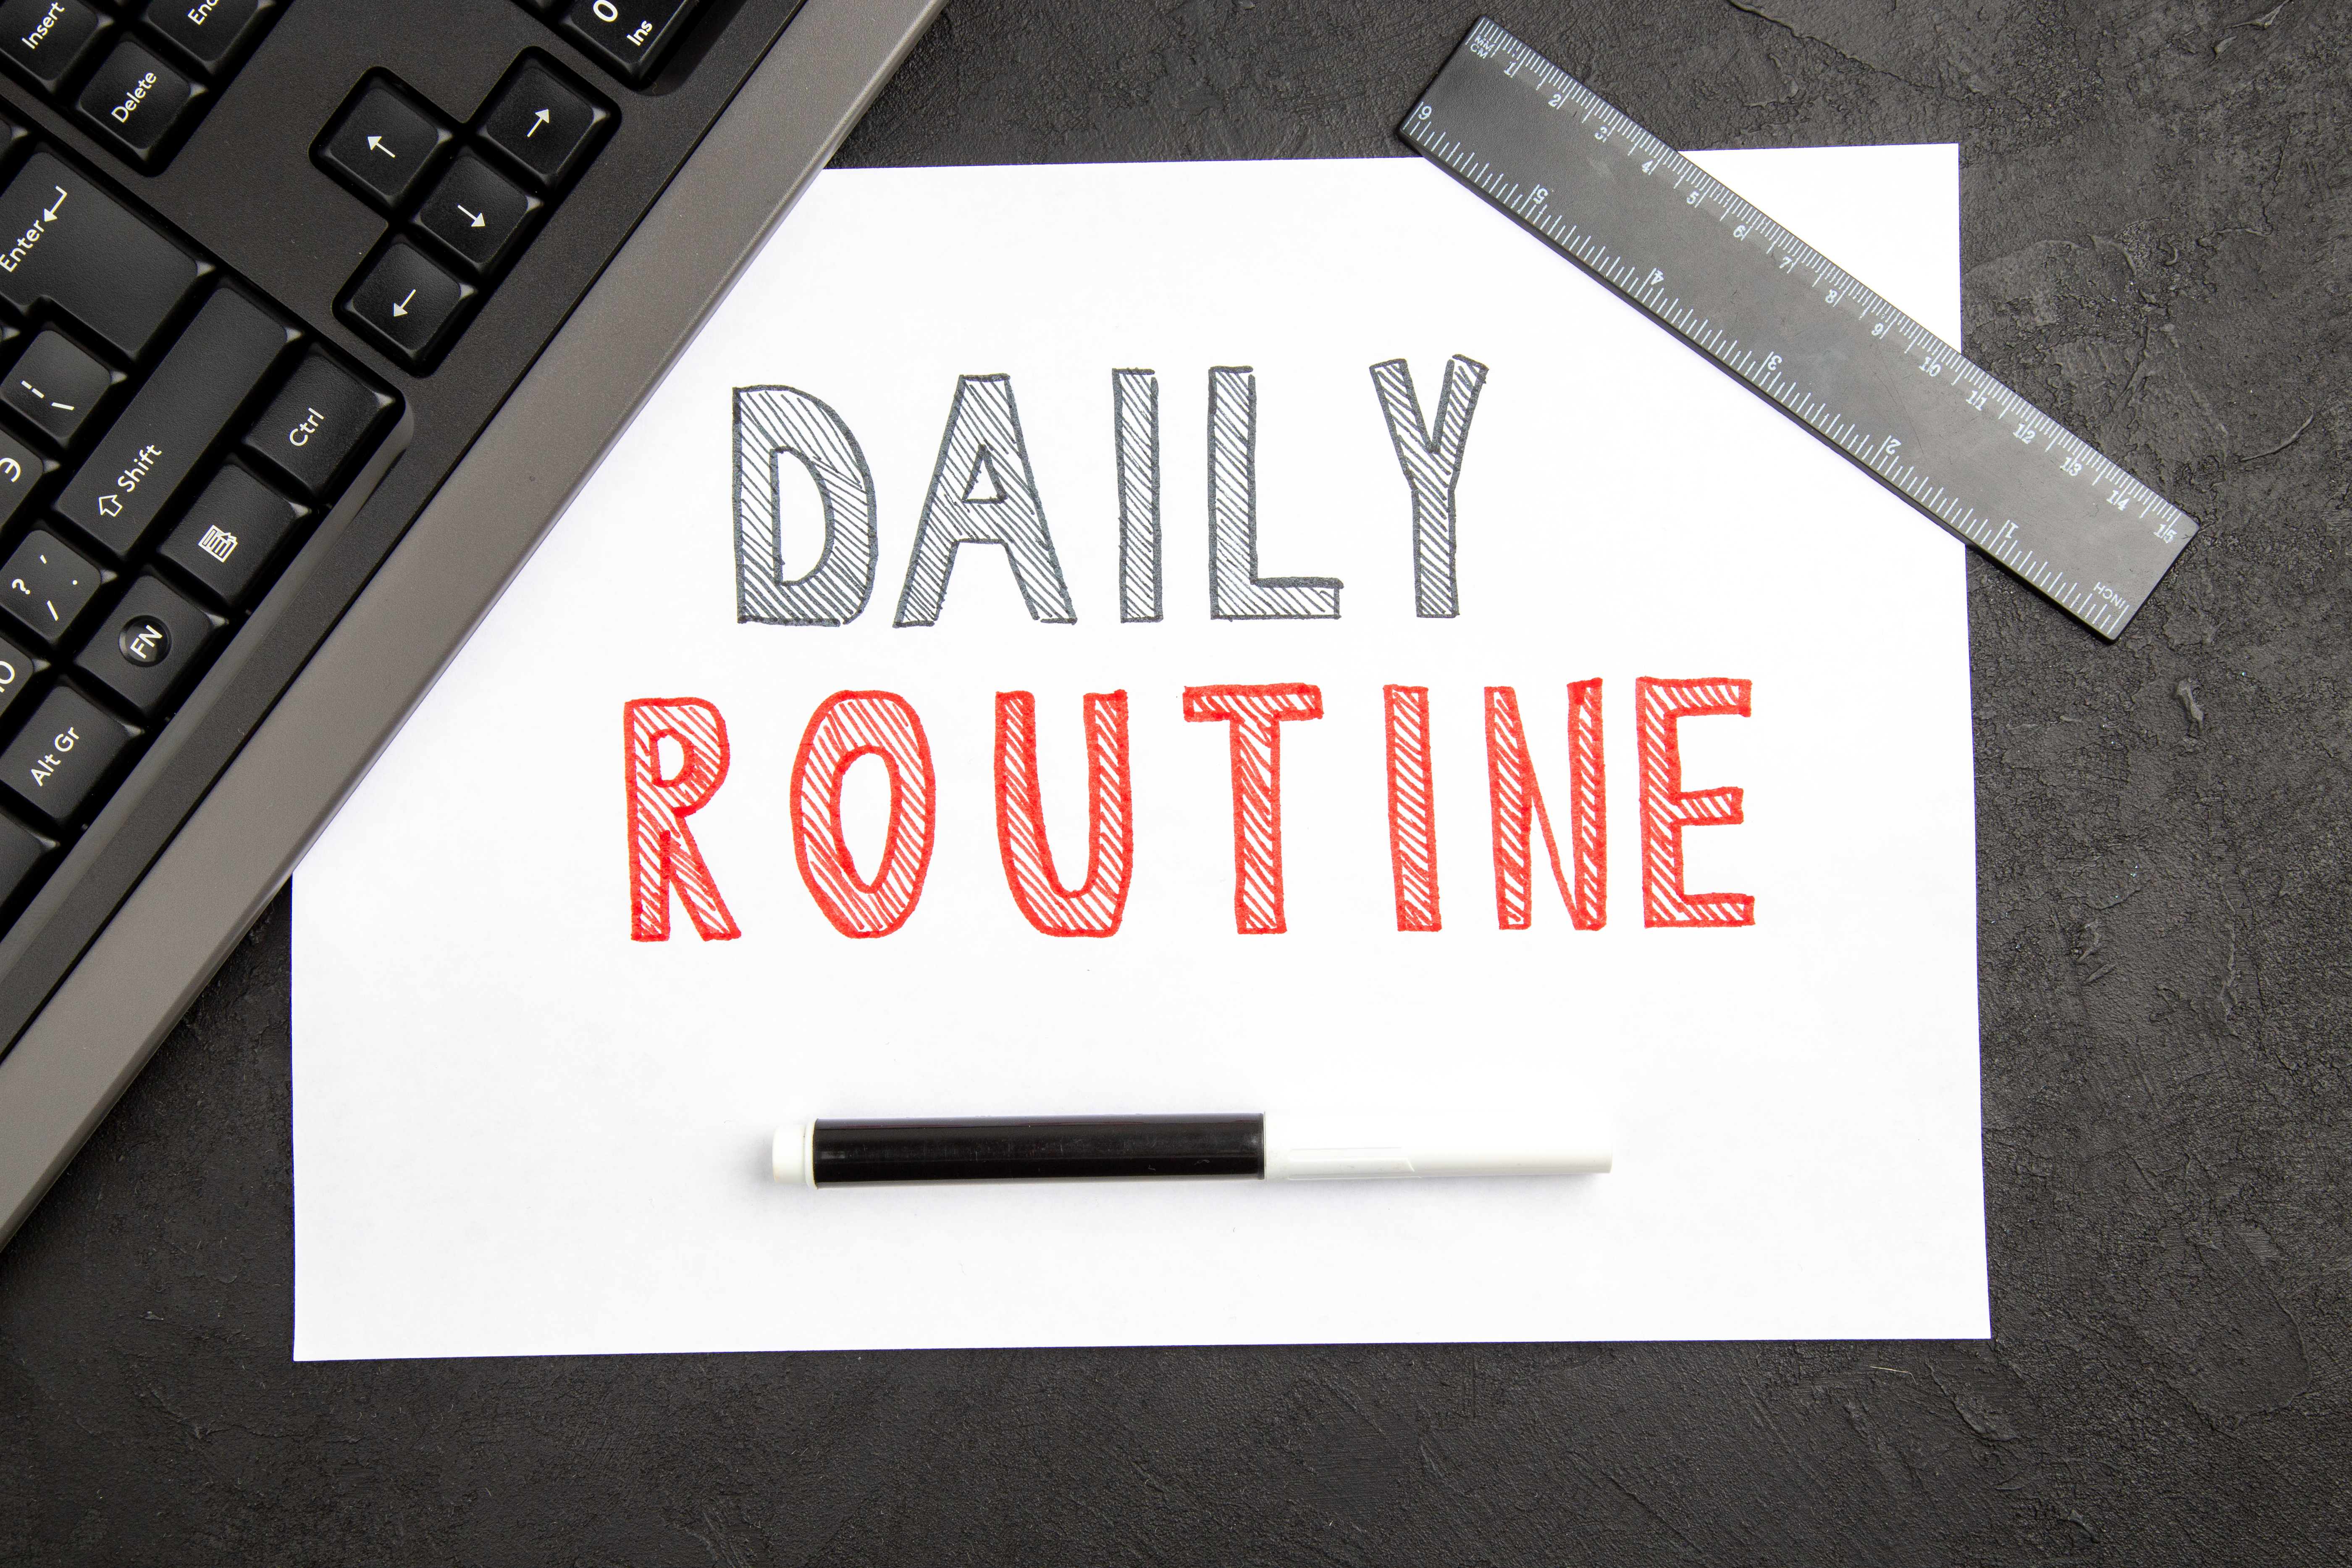 Daily routine is shown using a text